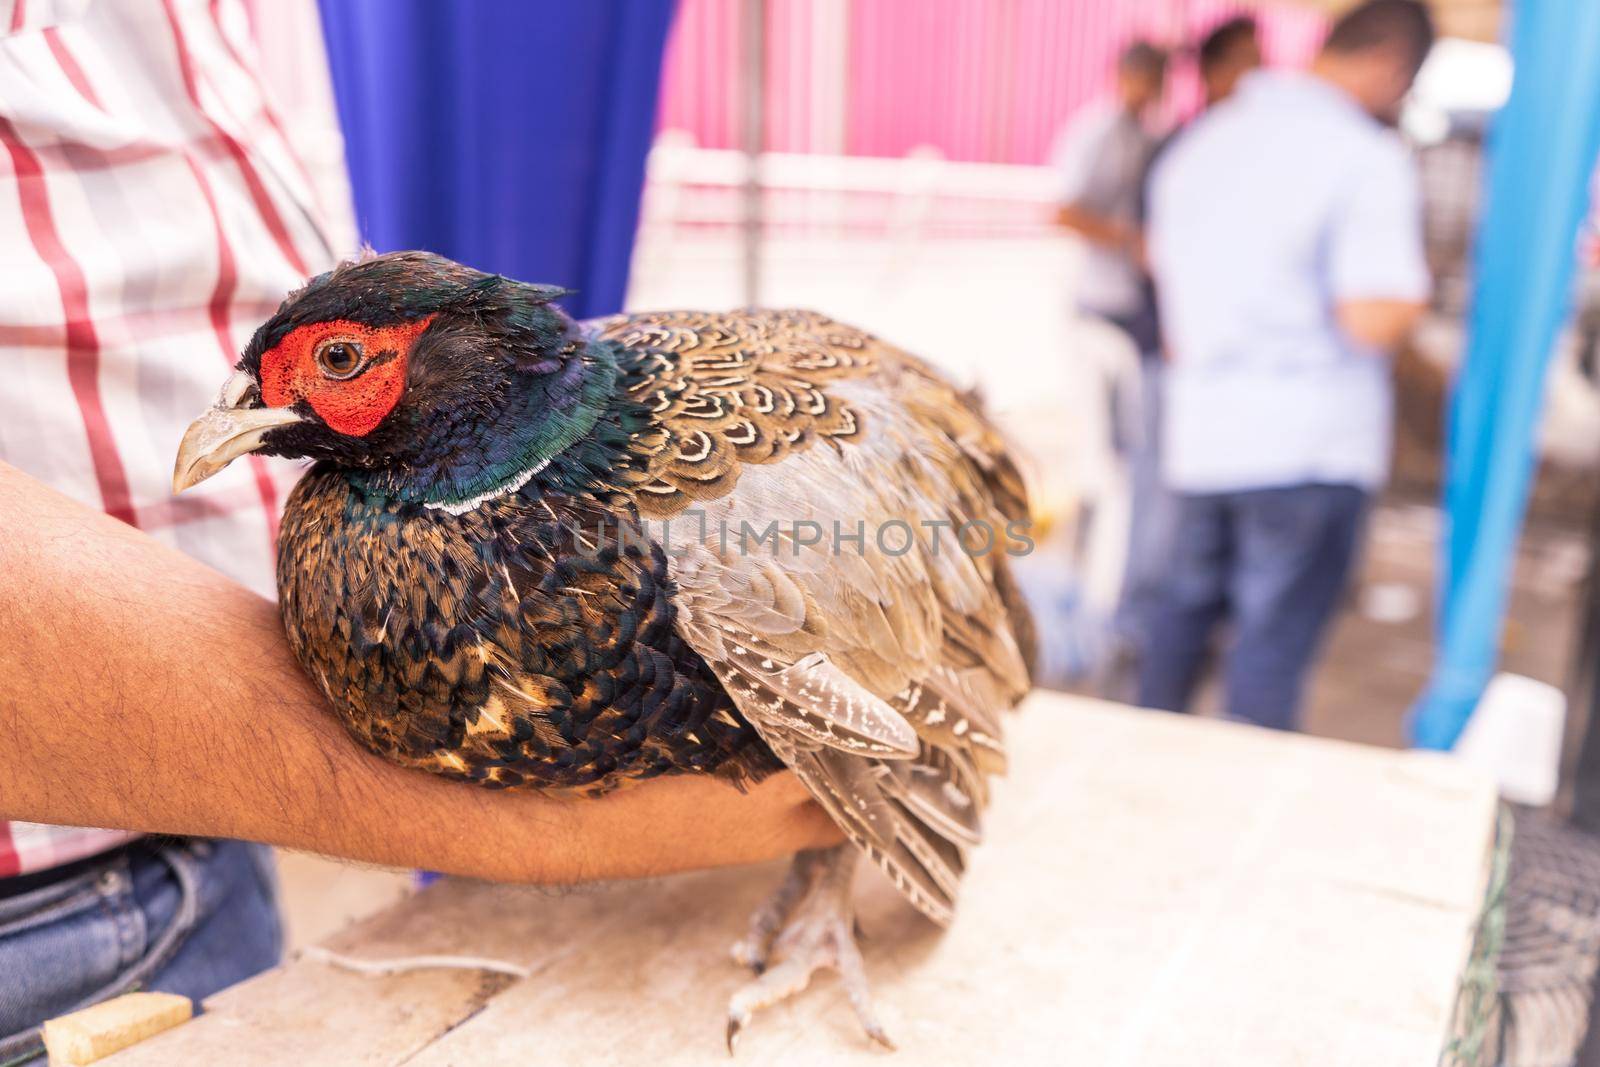 Man holding a bird in his hand at an exotic animal auction in Managua, Nicaragua